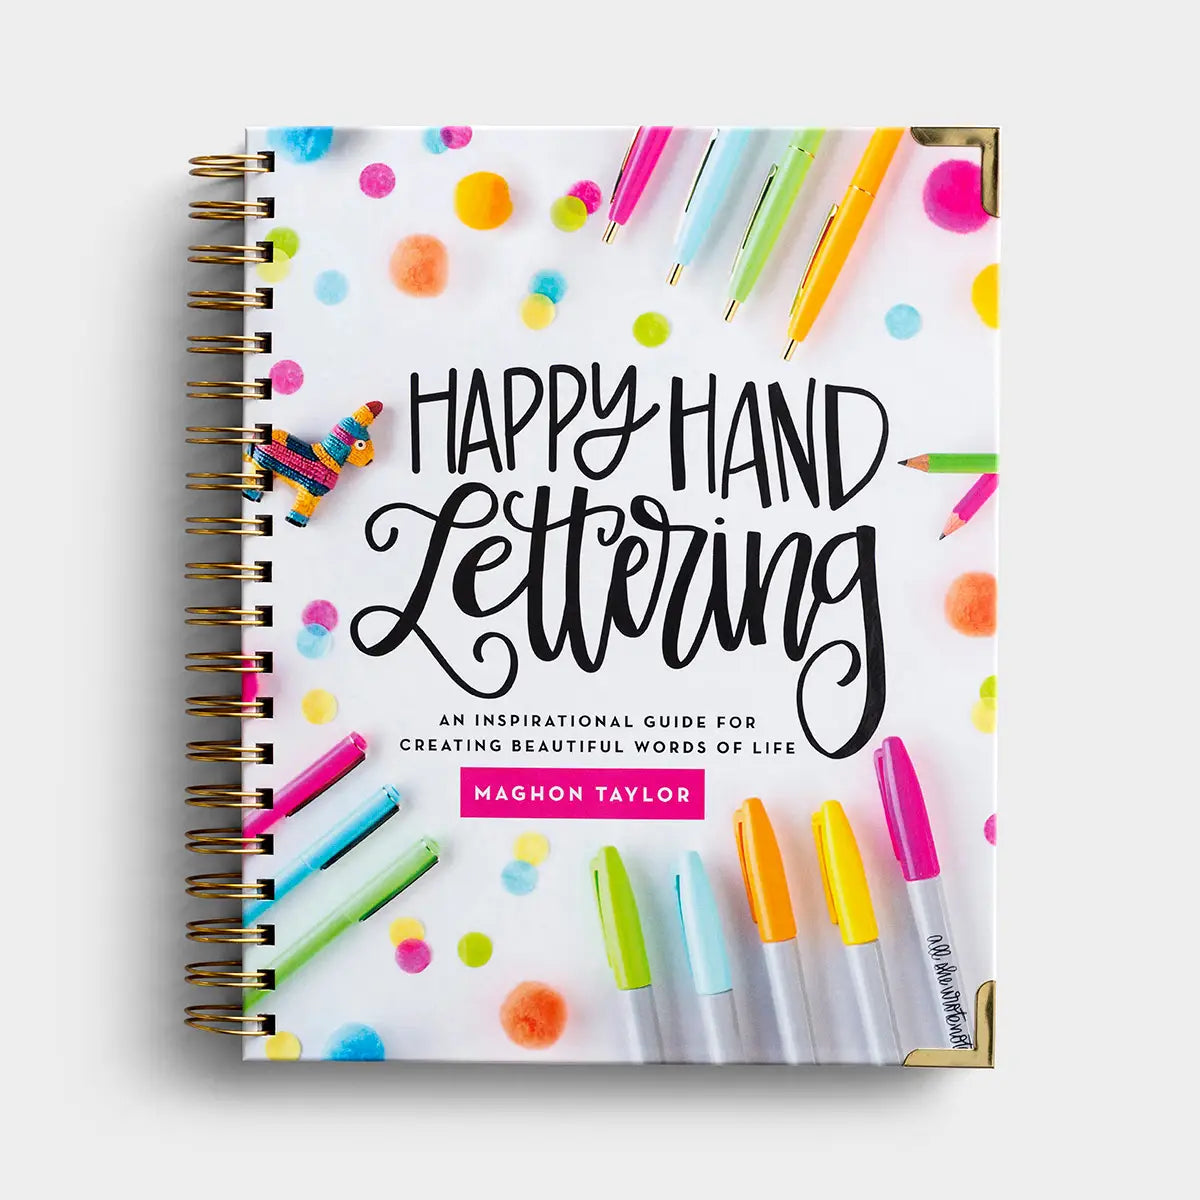 Daysprings  Happy Hand Lettering - Creative How-To Guide